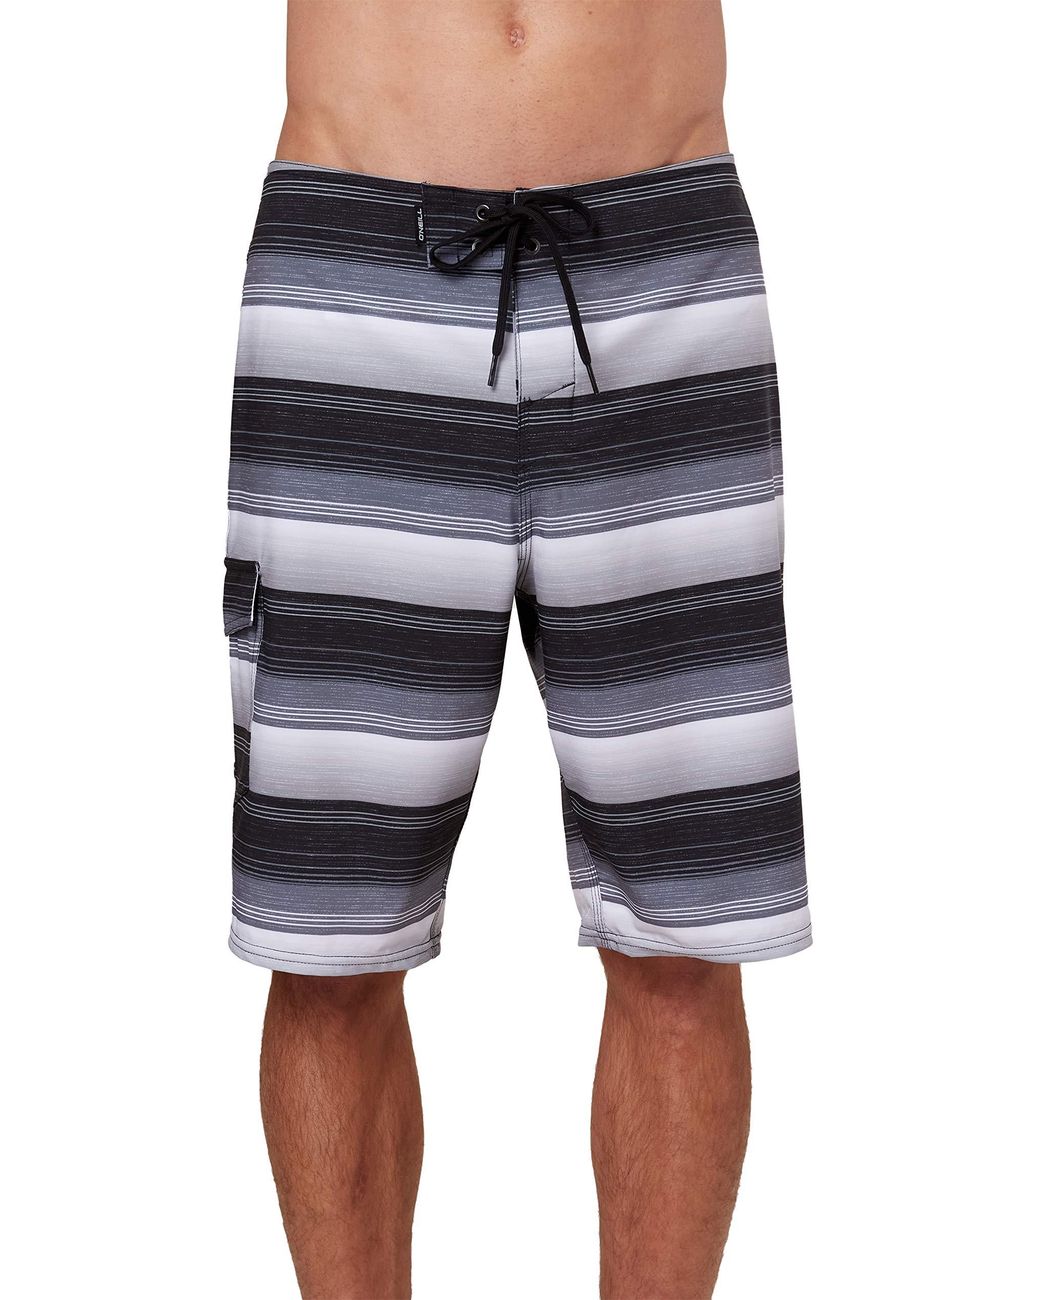 Both comfortable and chic Shop Now O'NEILL Men's Water Resistant ...